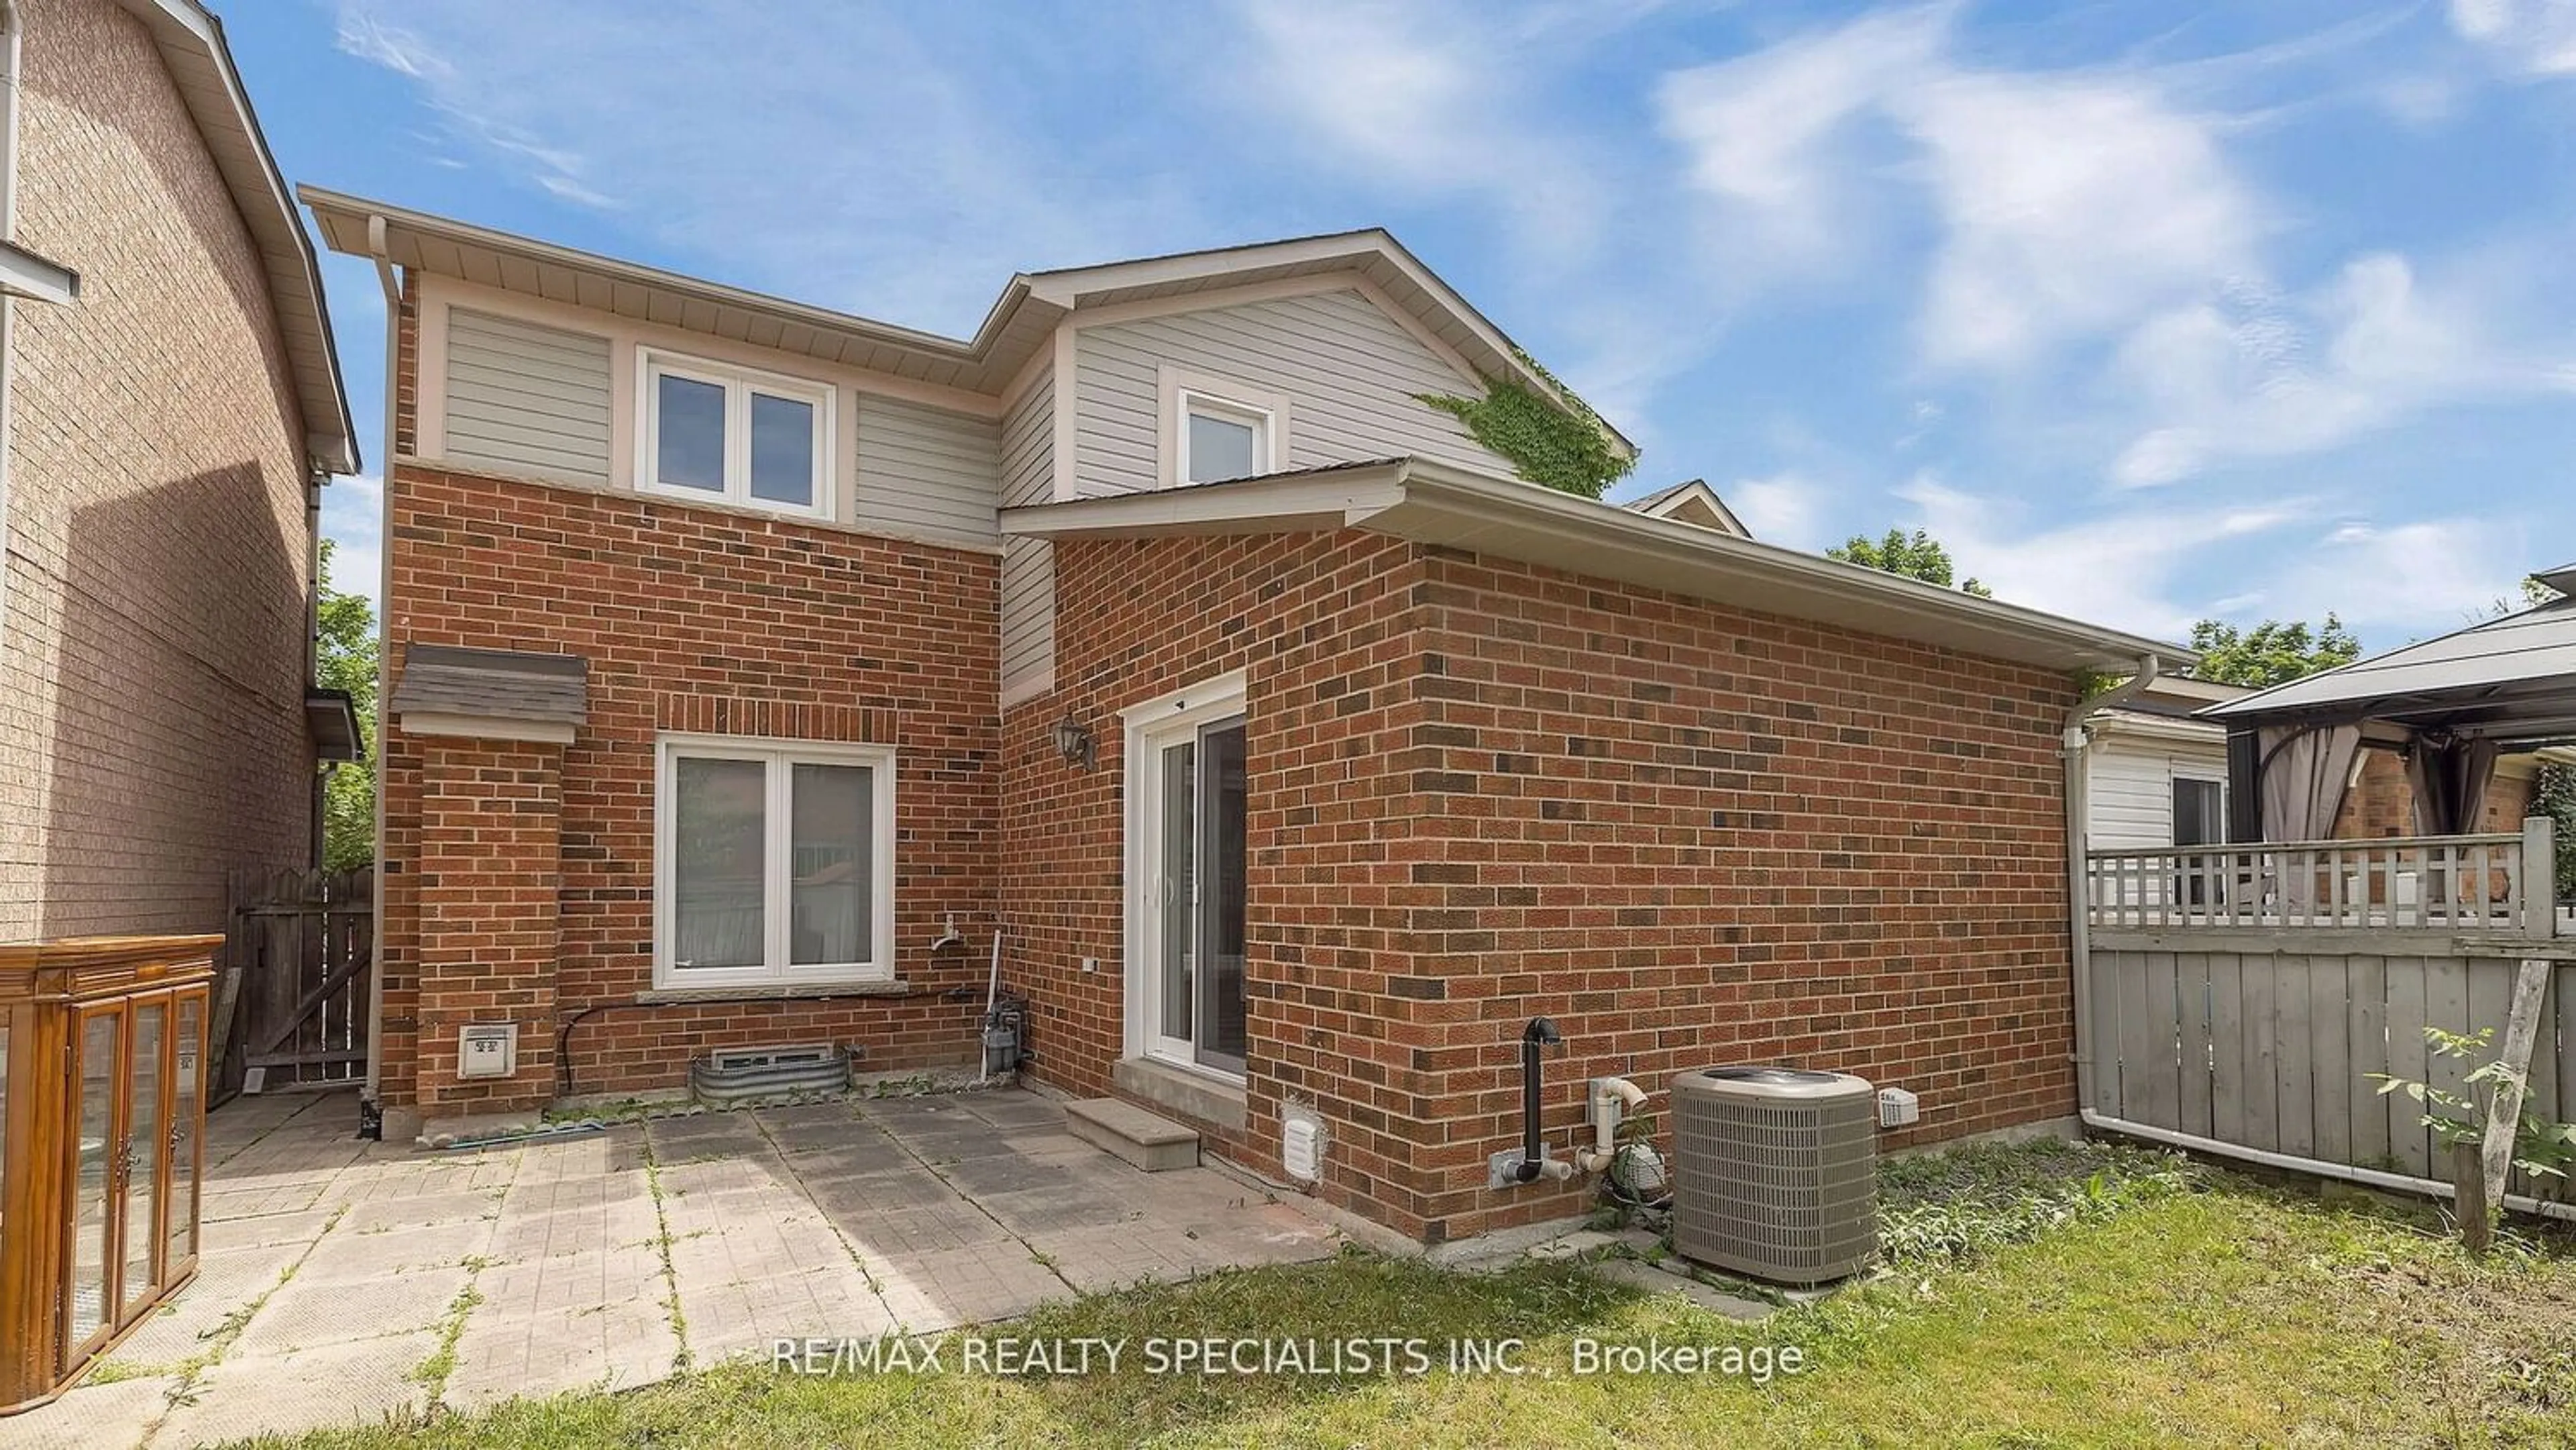 Home with brick exterior material for 14 Shady Pine Circ, Brampton Ontario L6R 1K2